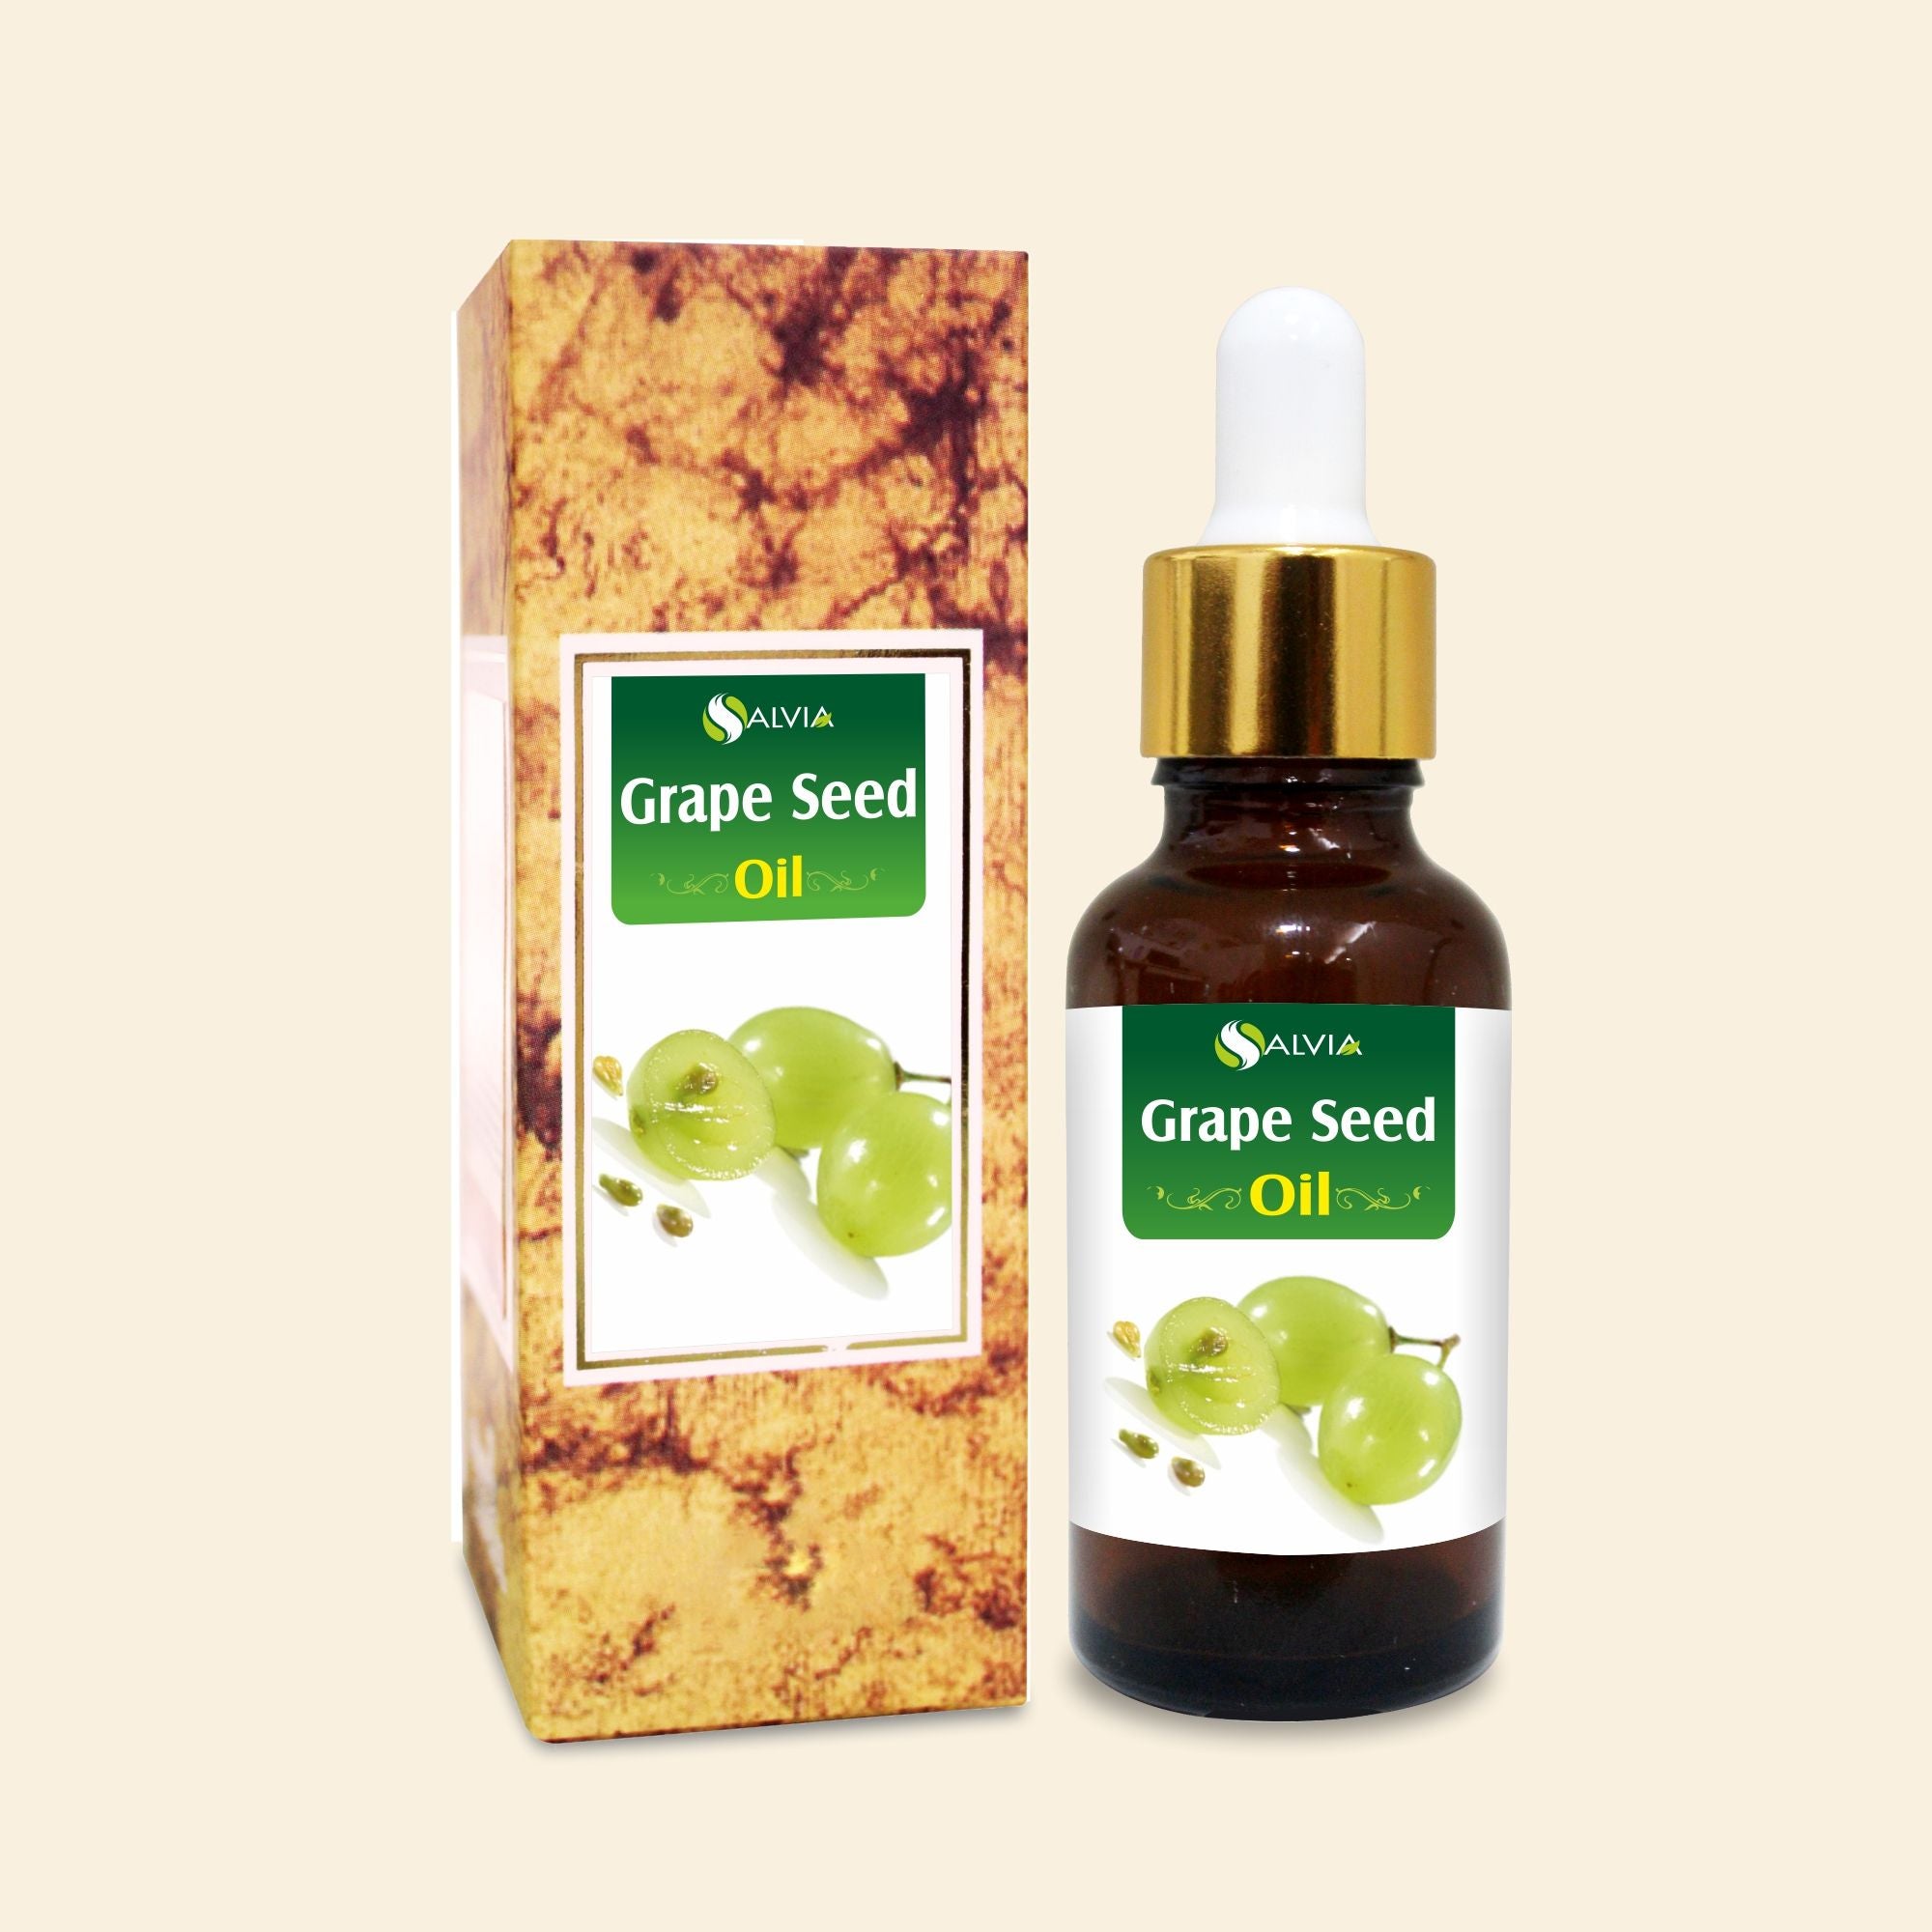 Salvia Natural Carrier Oils Grape Seed Oil Natural & Pure Carrier oil